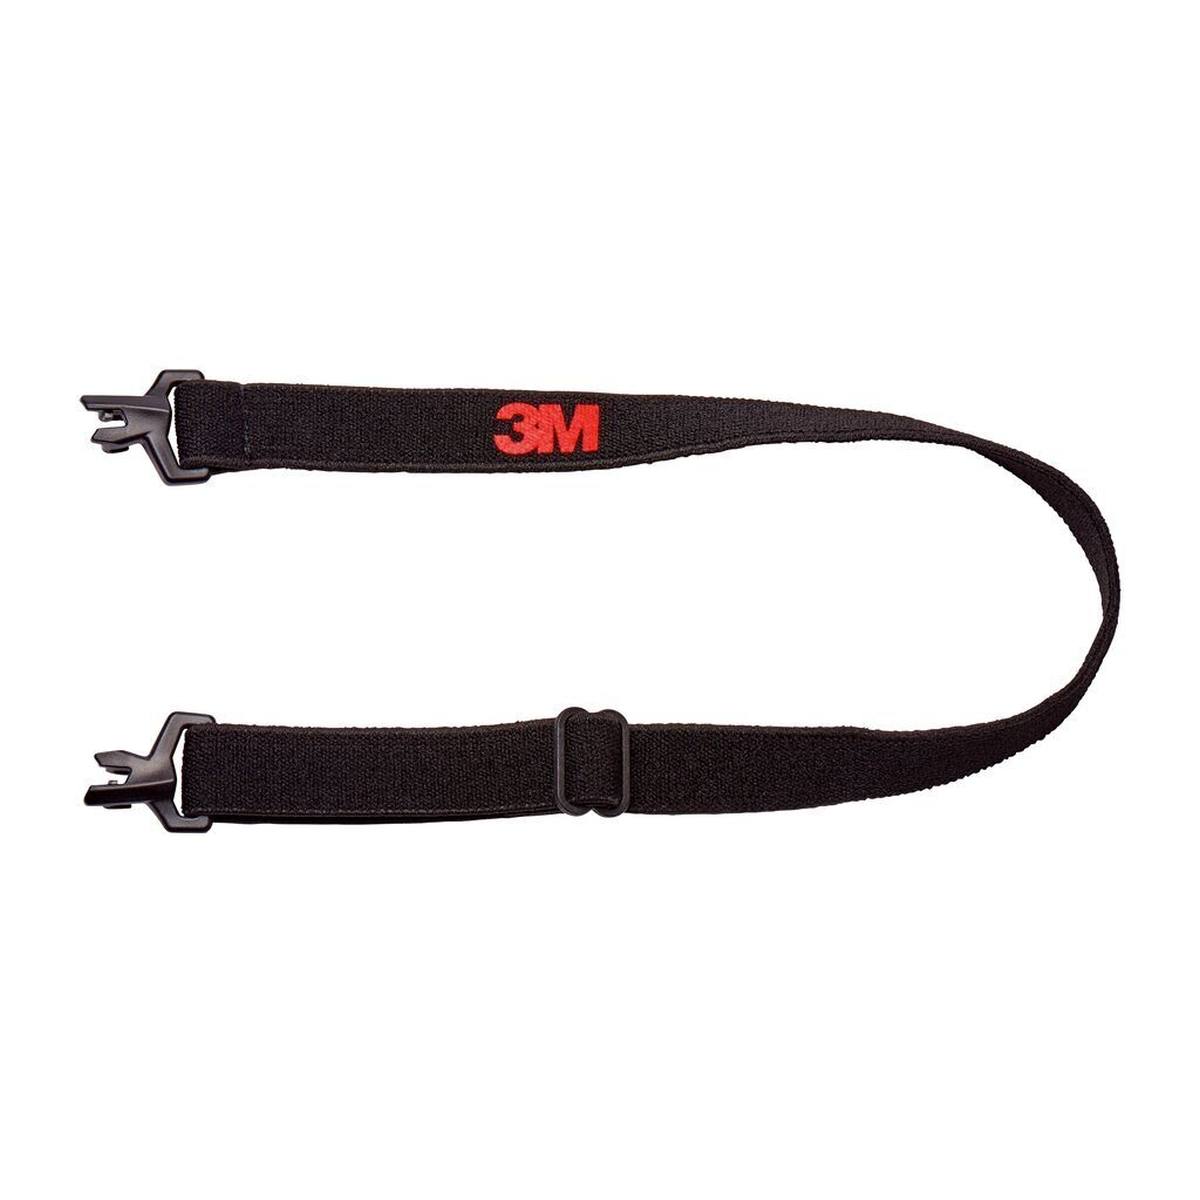 3M Solus 1000 headband for safety spectacles, customisable nylon, 1000S-EU